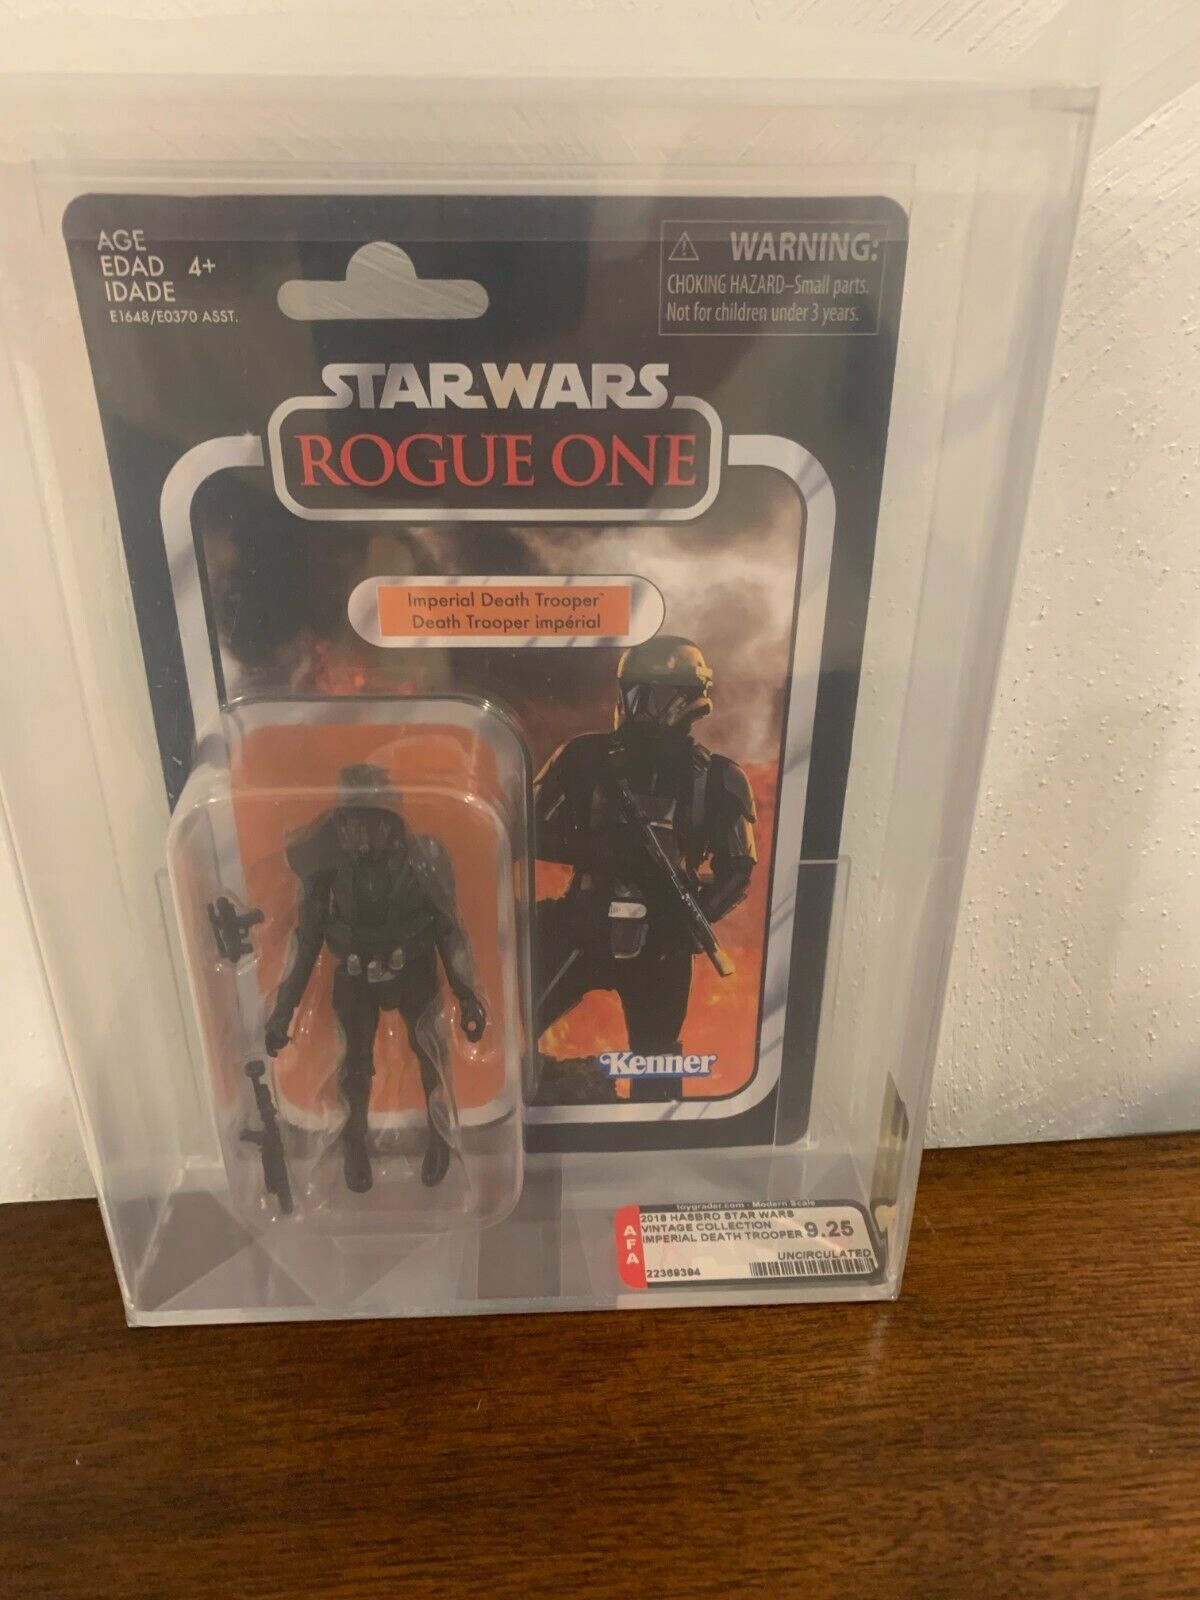 Star Wars Vintage Collection Rogue One IMPERIAL DEATH TROOPER VC127 AFA U9.25